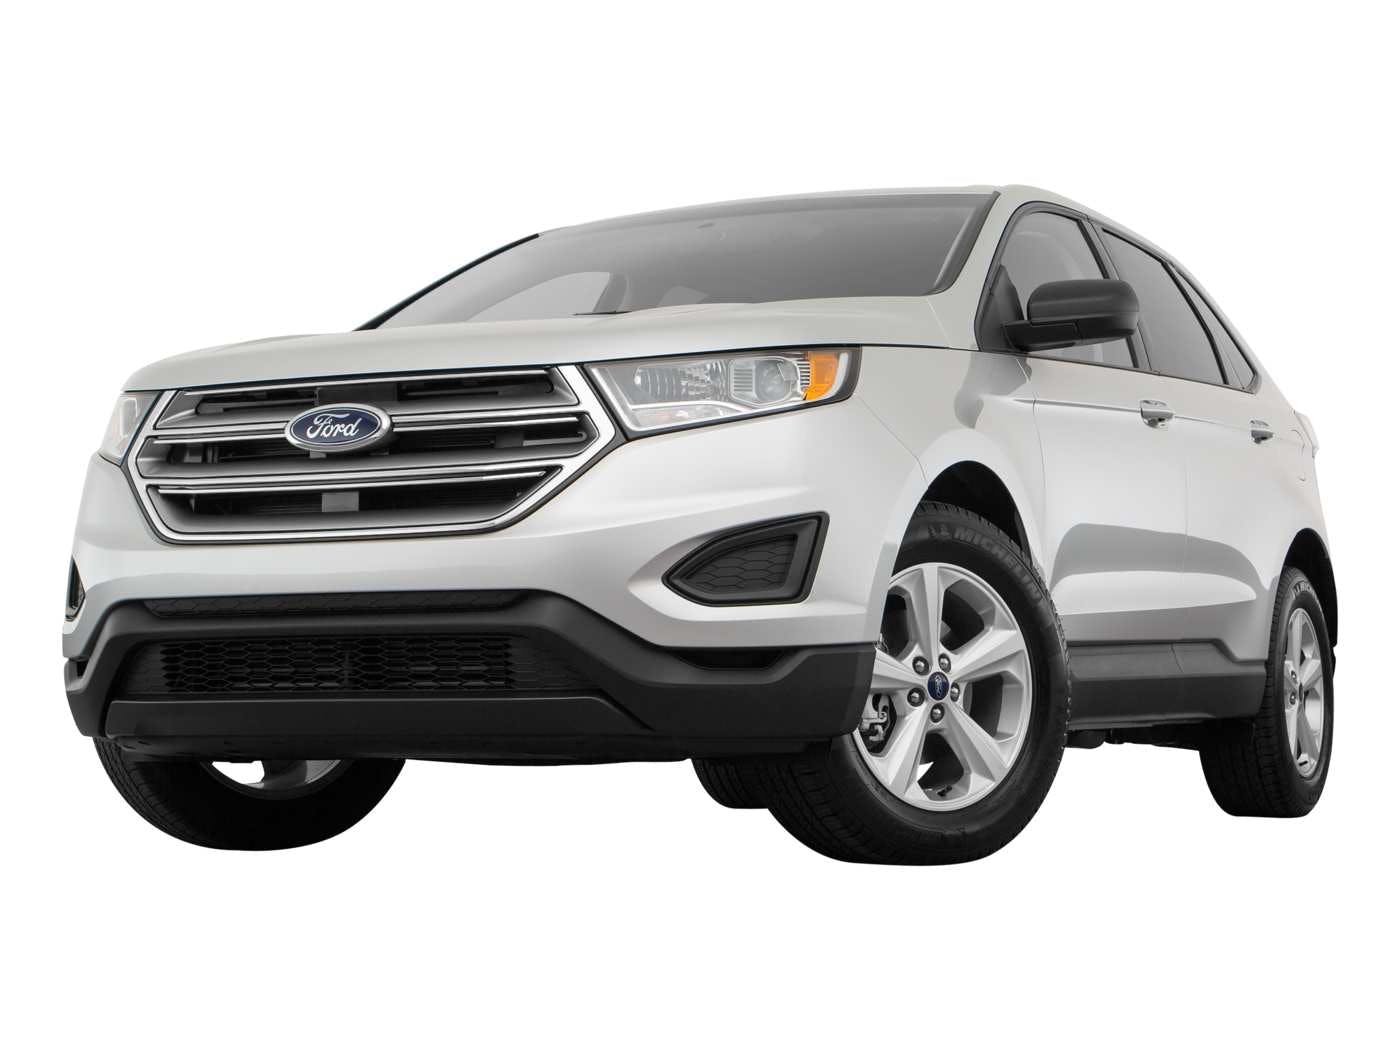 2018 Ford Edge review